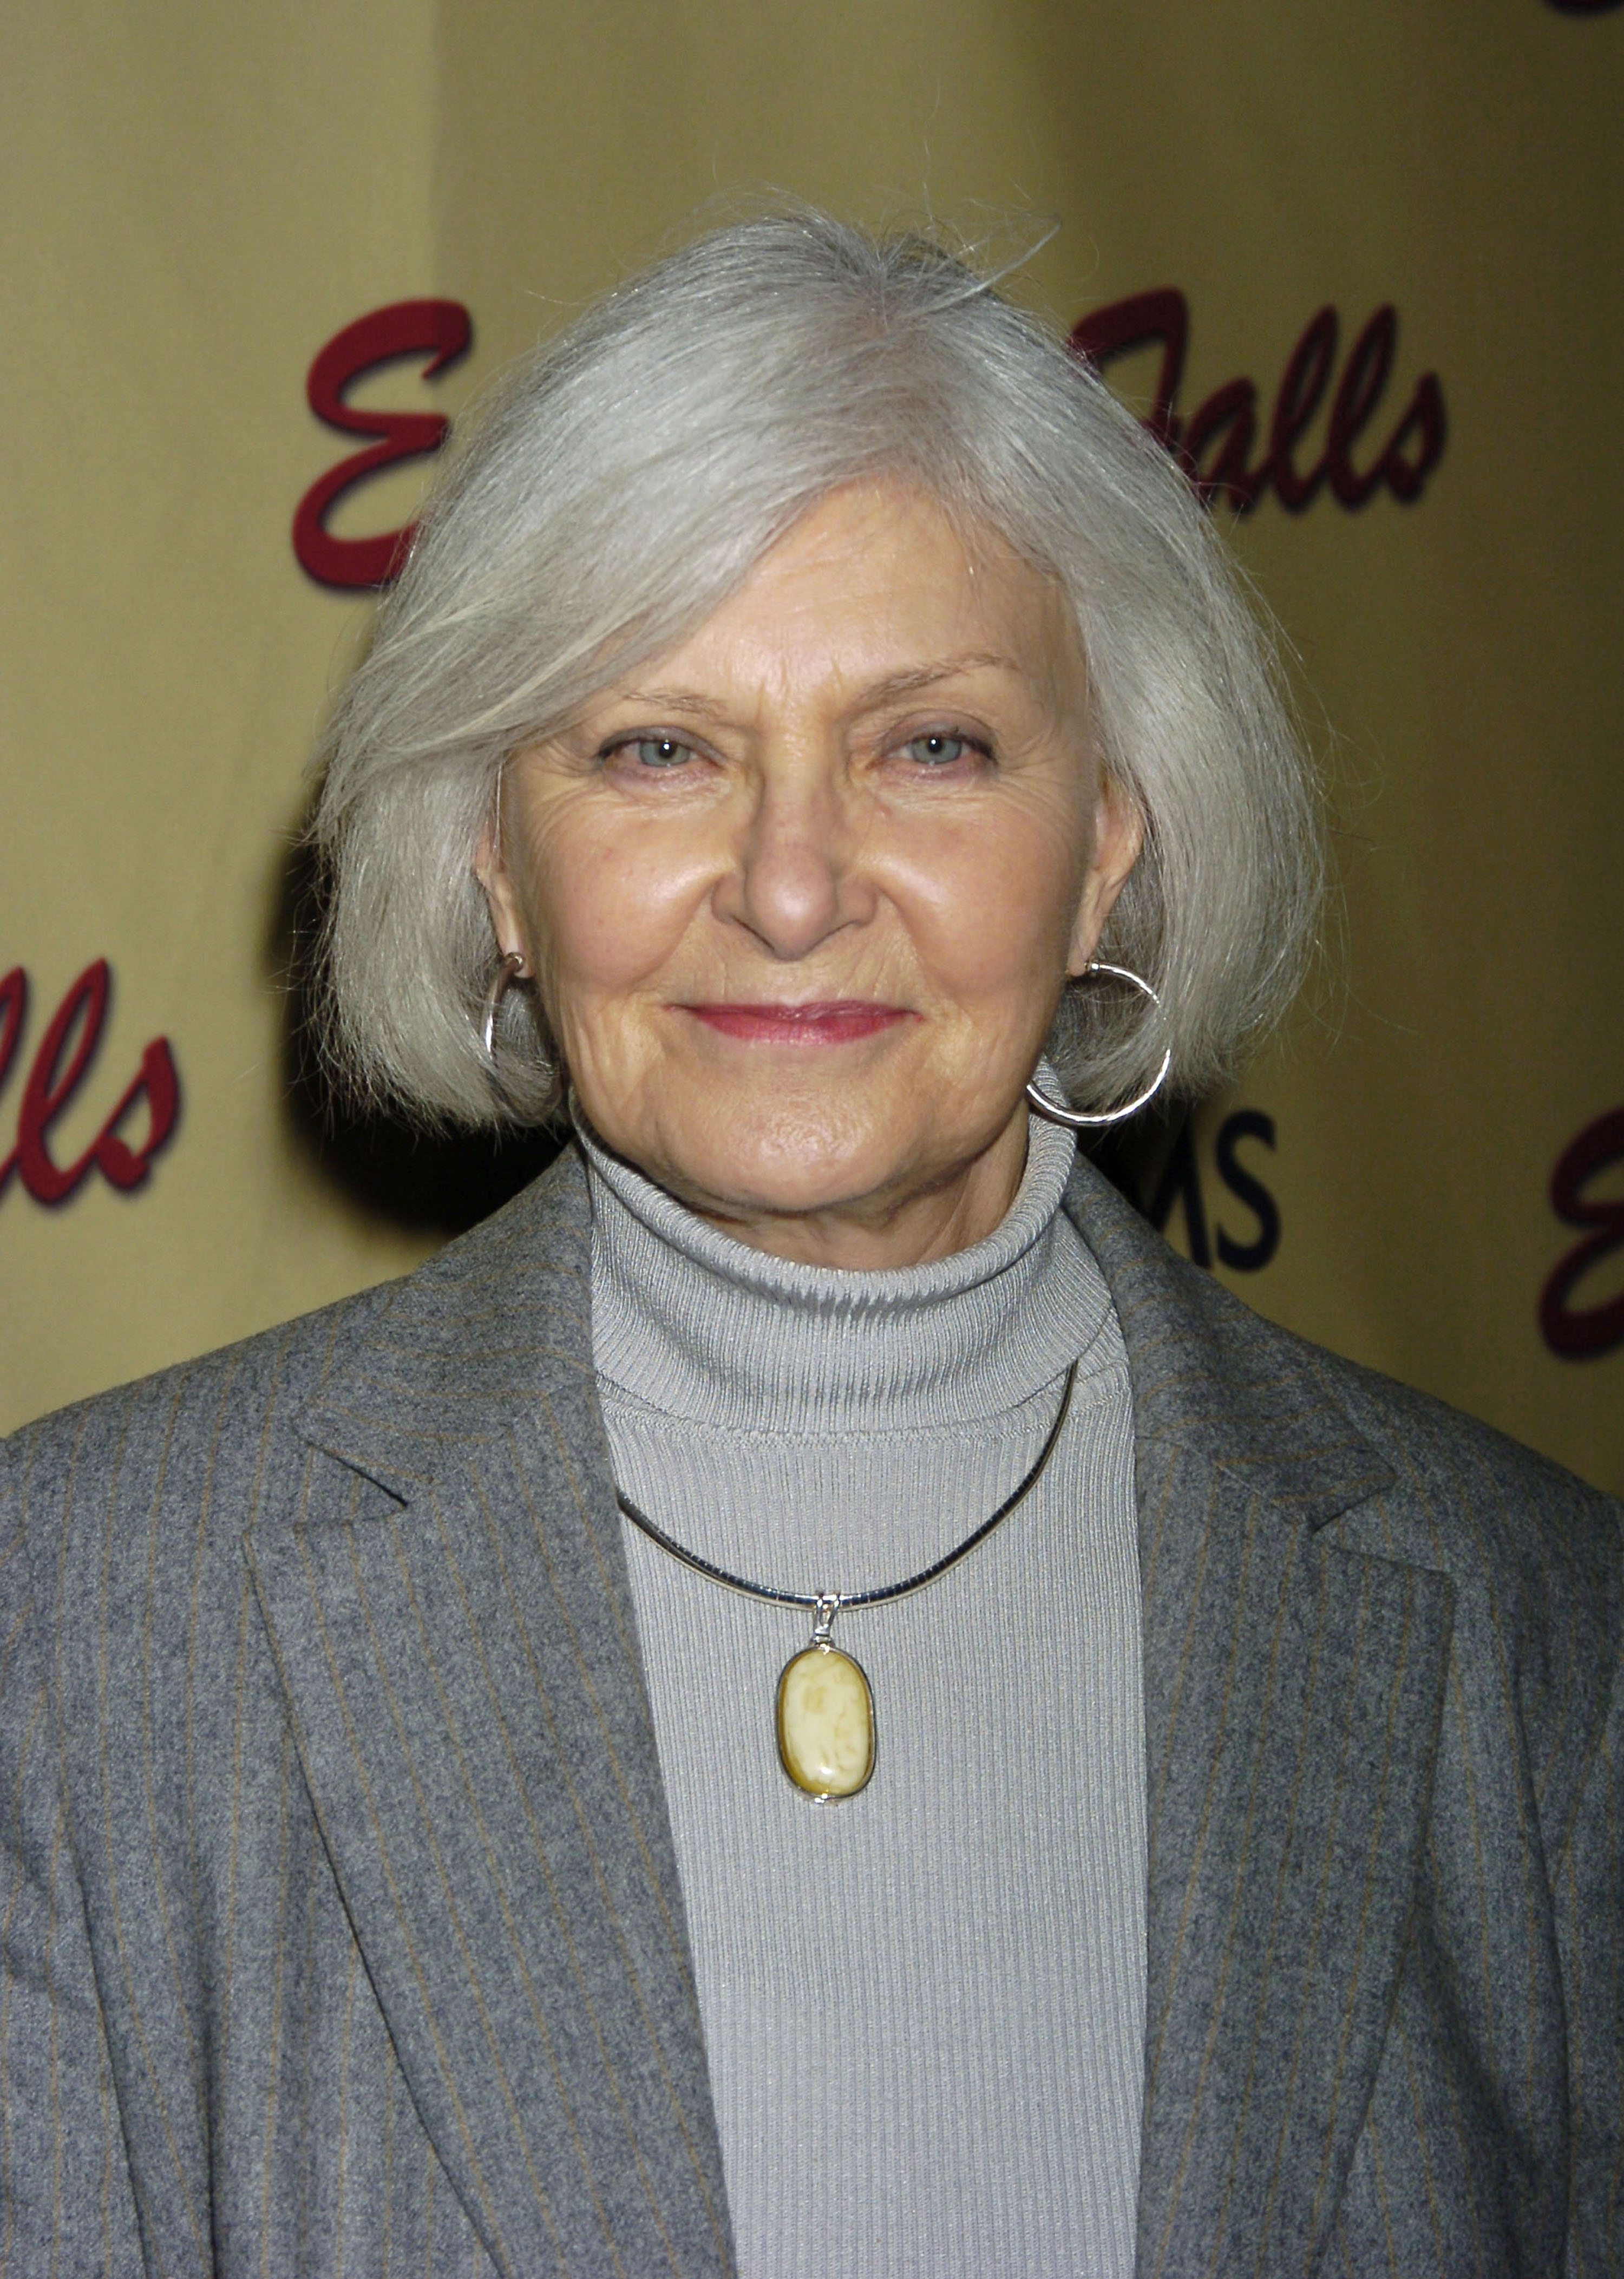 Joanne Woodward during HBO Films "Empire Falls" New York City Premiere at Metropolitan Museum of Art in New York City, New York, in 2005 | Source: Getty Images